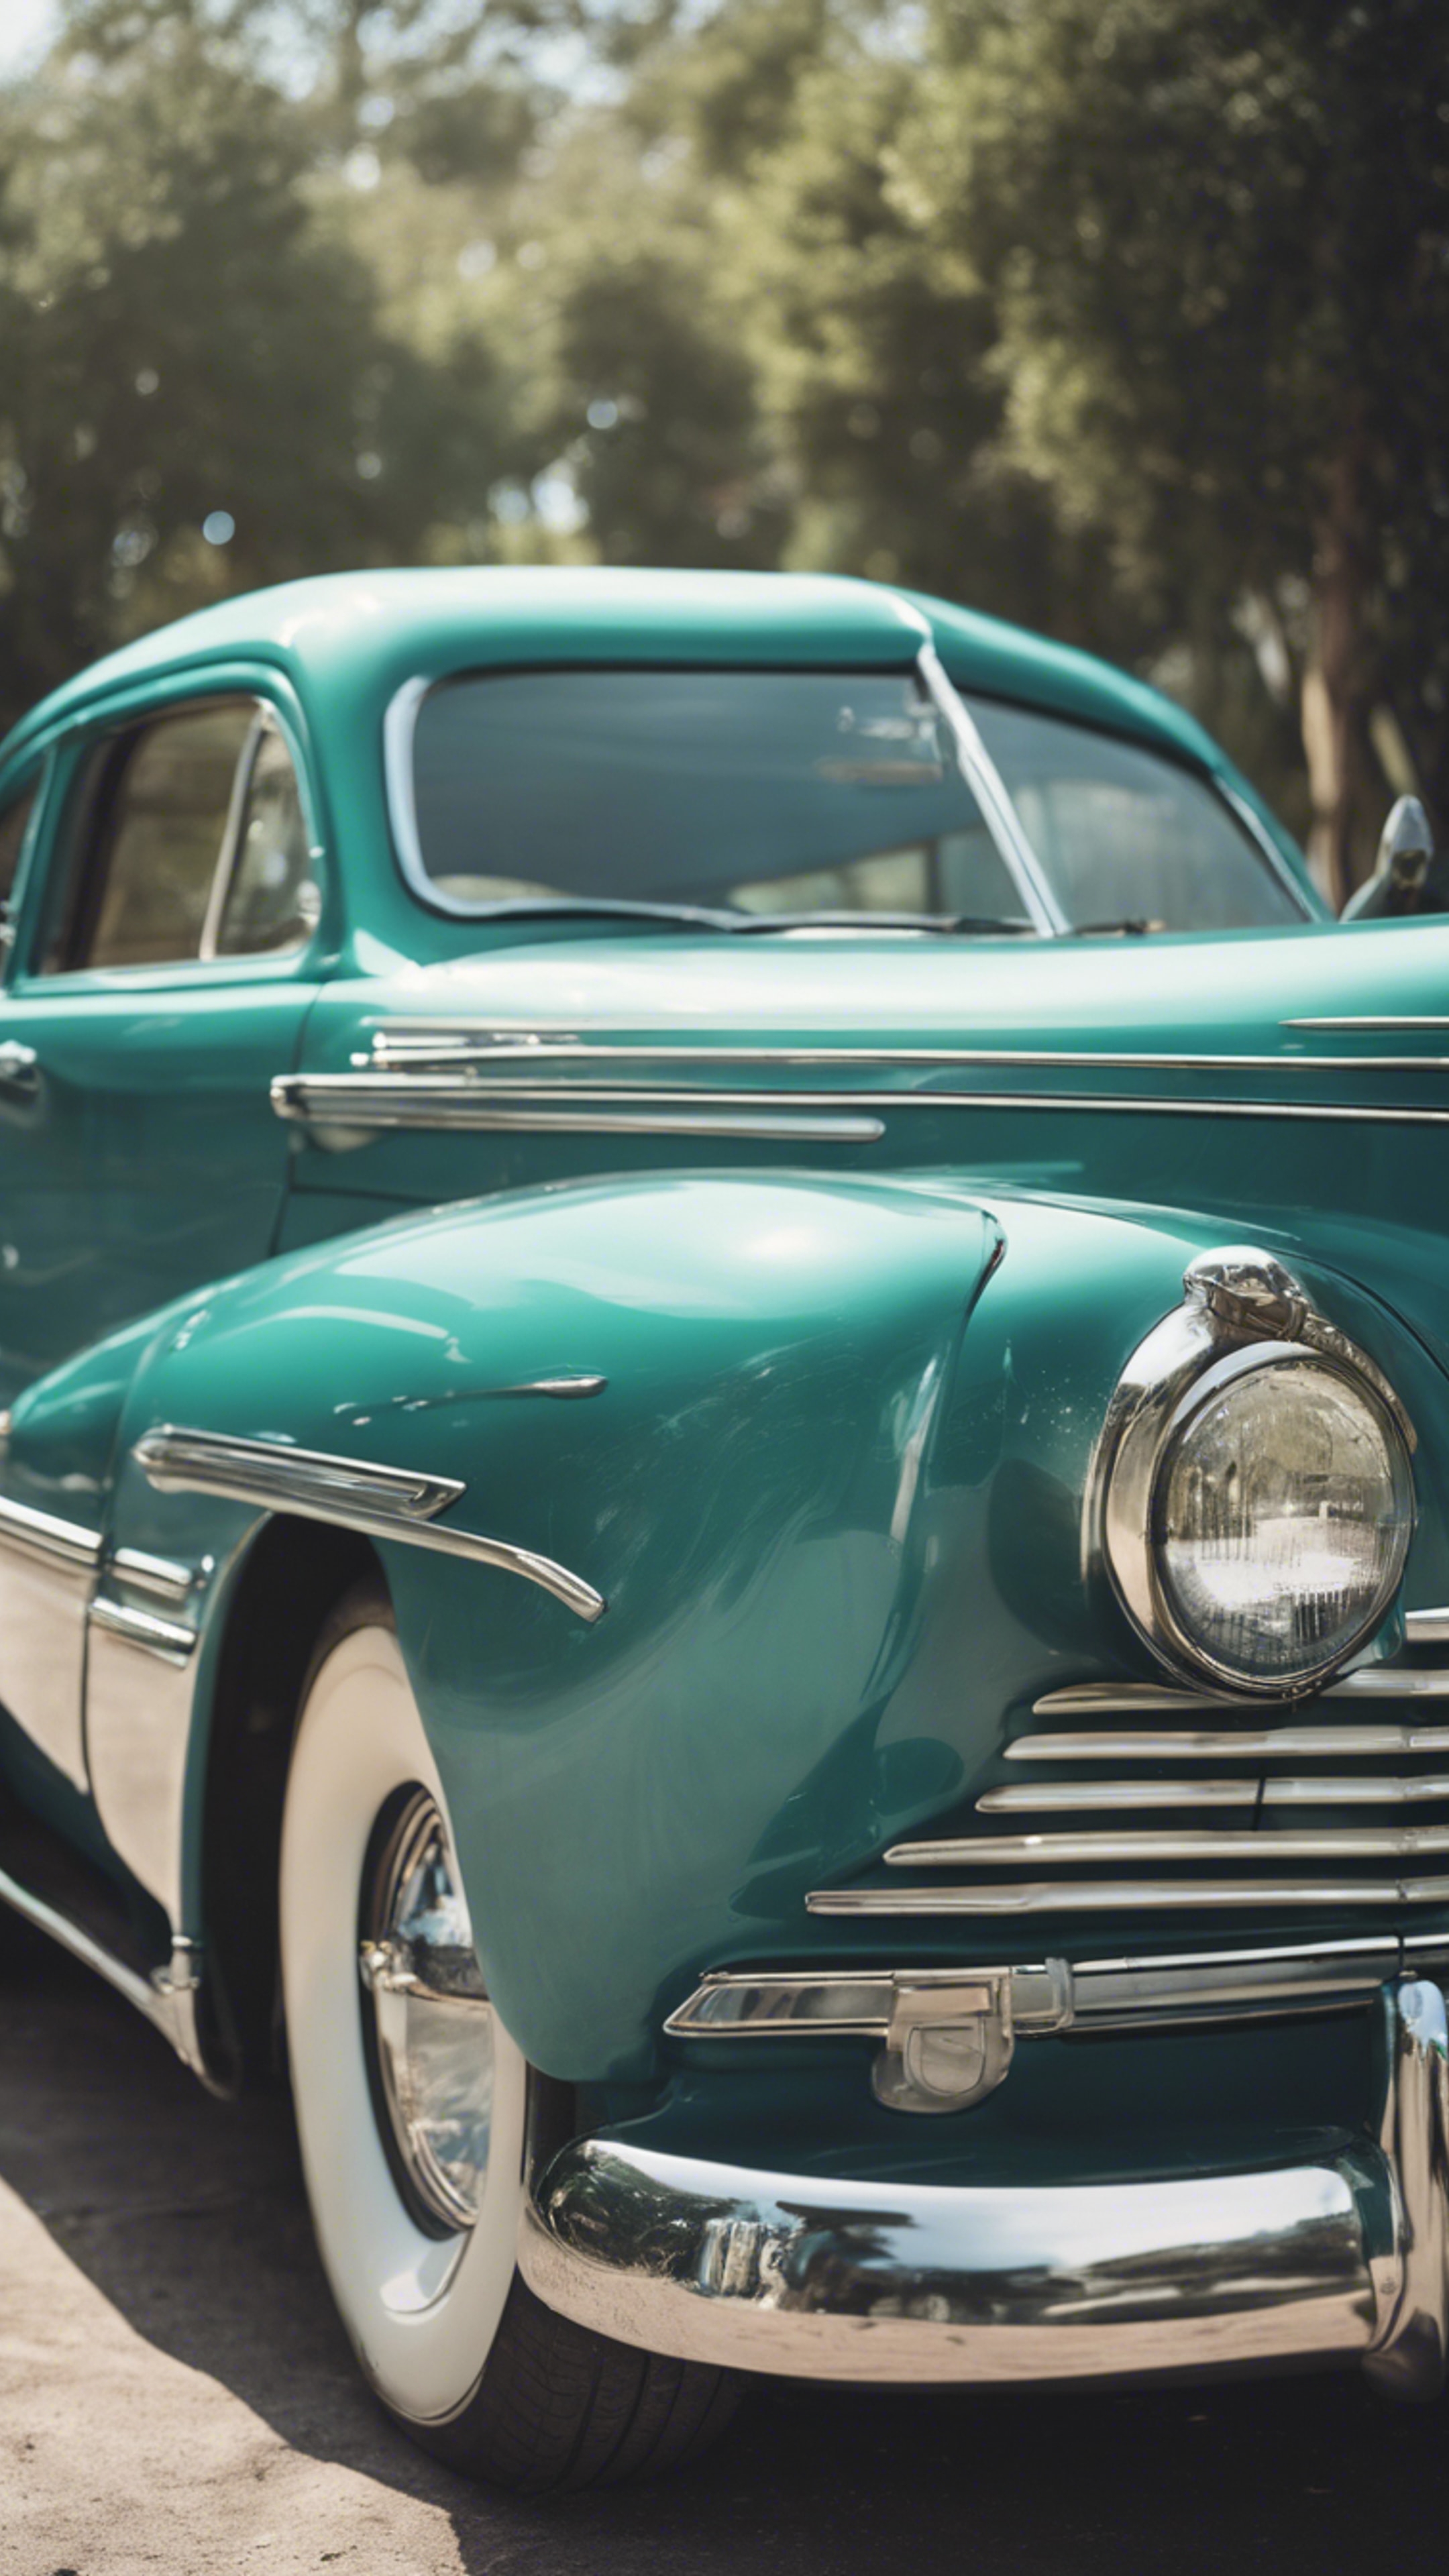 A vintage automobile polished in a cool teal color. ផ្ទាំង​រូបភាព[a65c55f132fb459cb8fd]